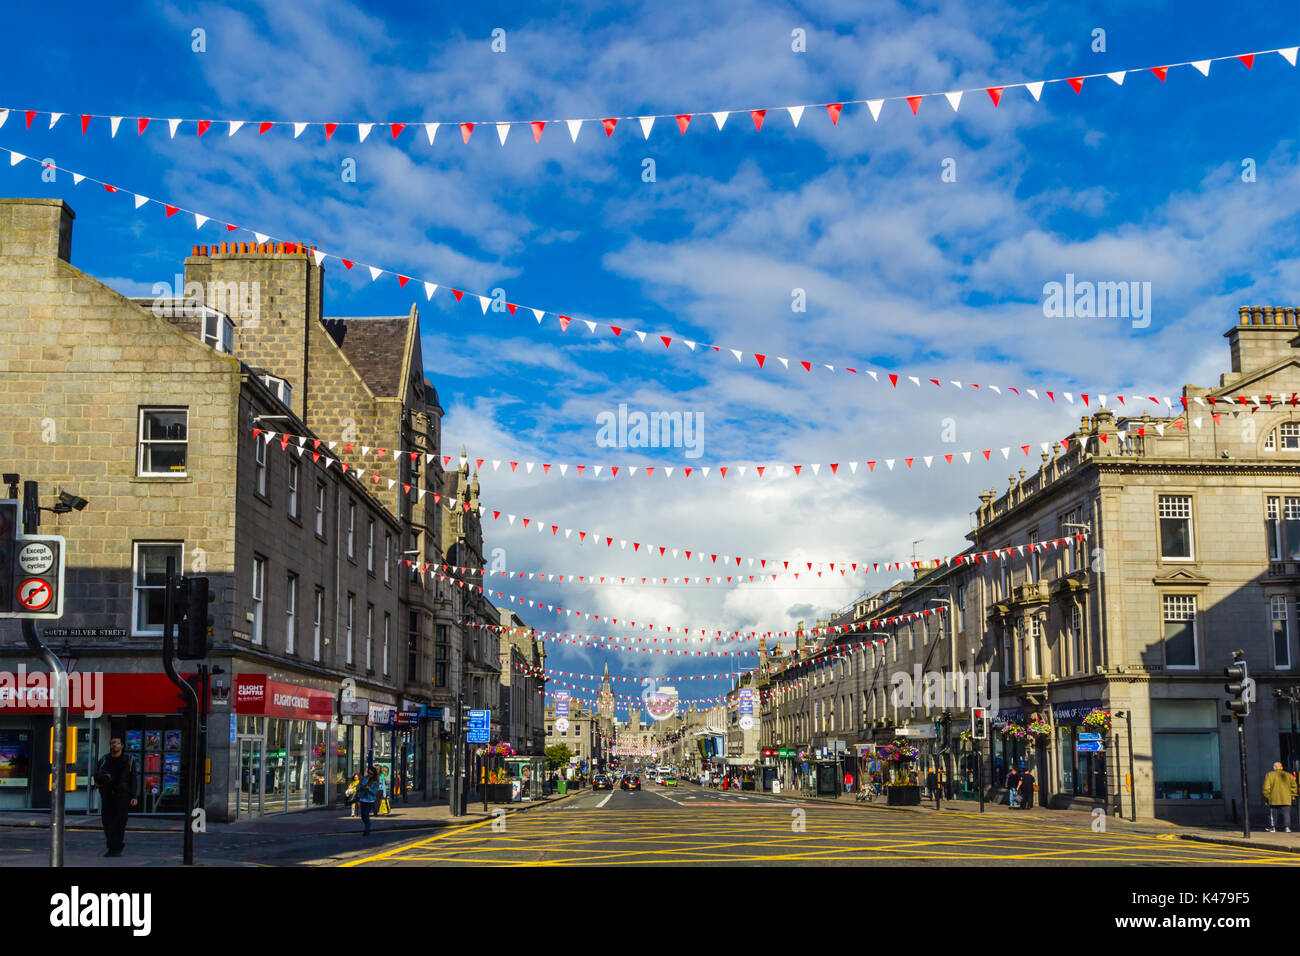 Aberdeen, a city in Scotland, Great Britain Stock Photo